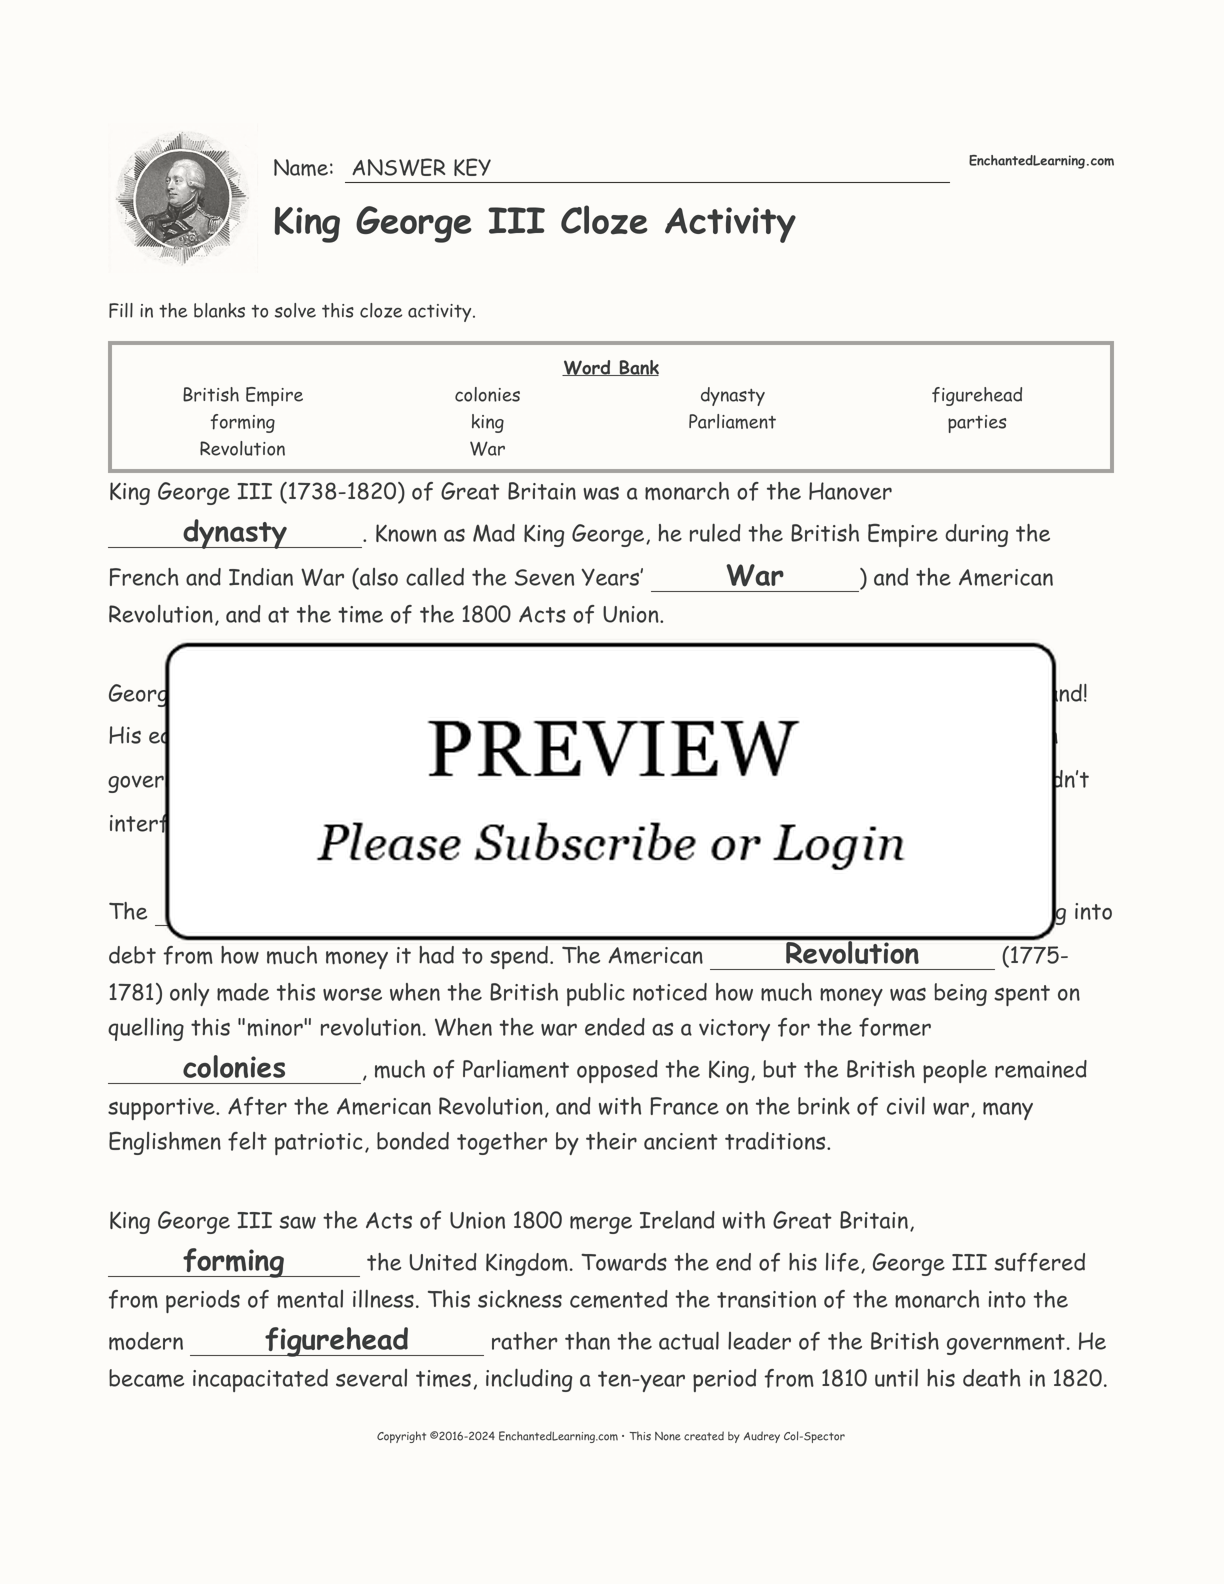 King George III Cloze Activity interactive worksheet page 2